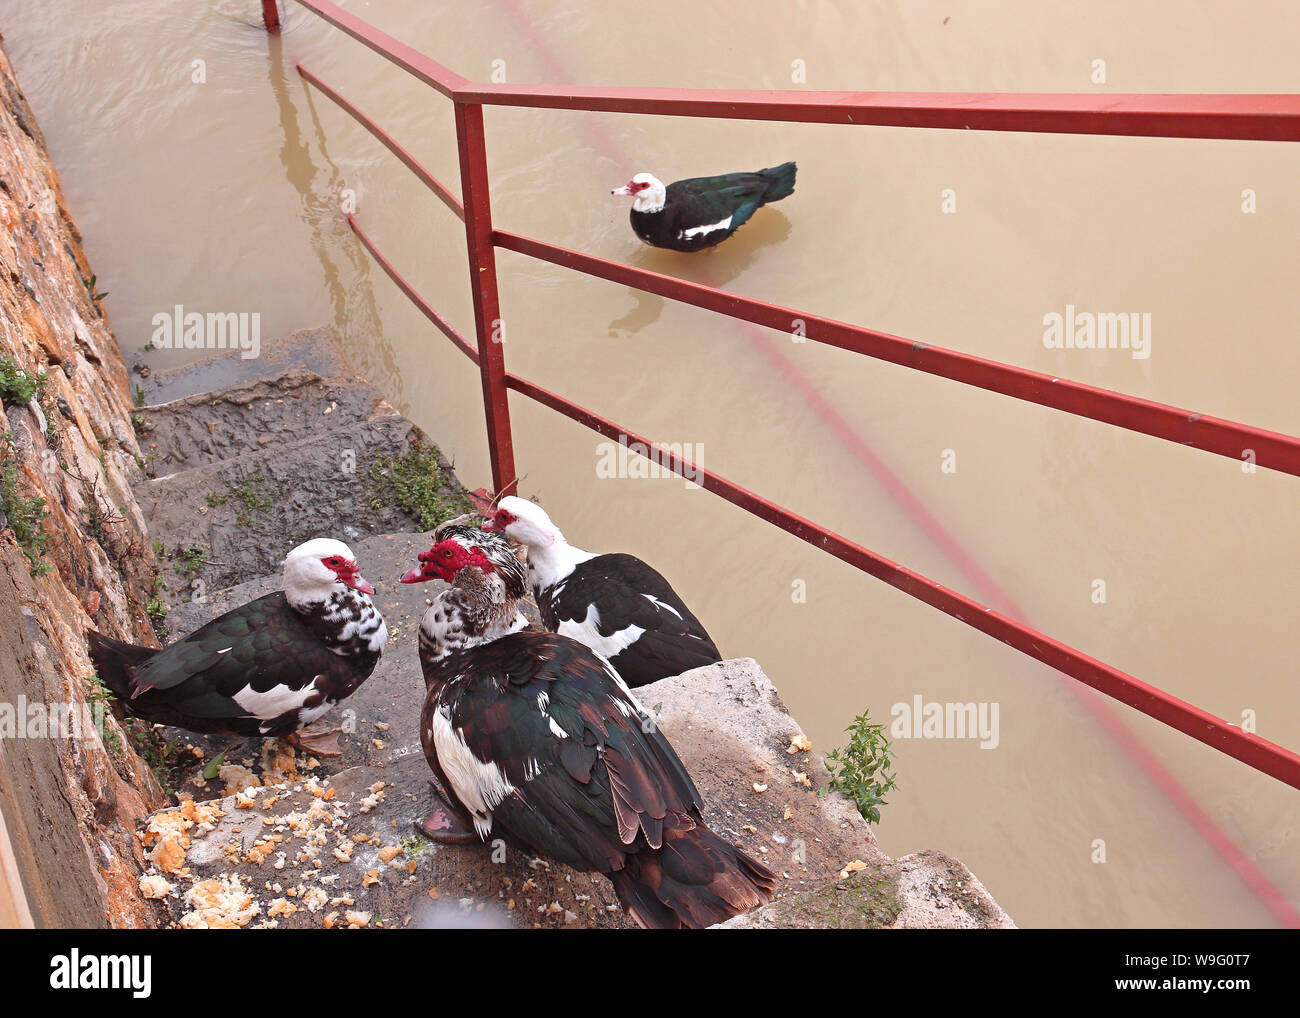 A conference on the steps. Muscovy ducks gather together on the dirty old steps down into the River Segura at Rojales, Alicante Province, Spain. Stock Photo